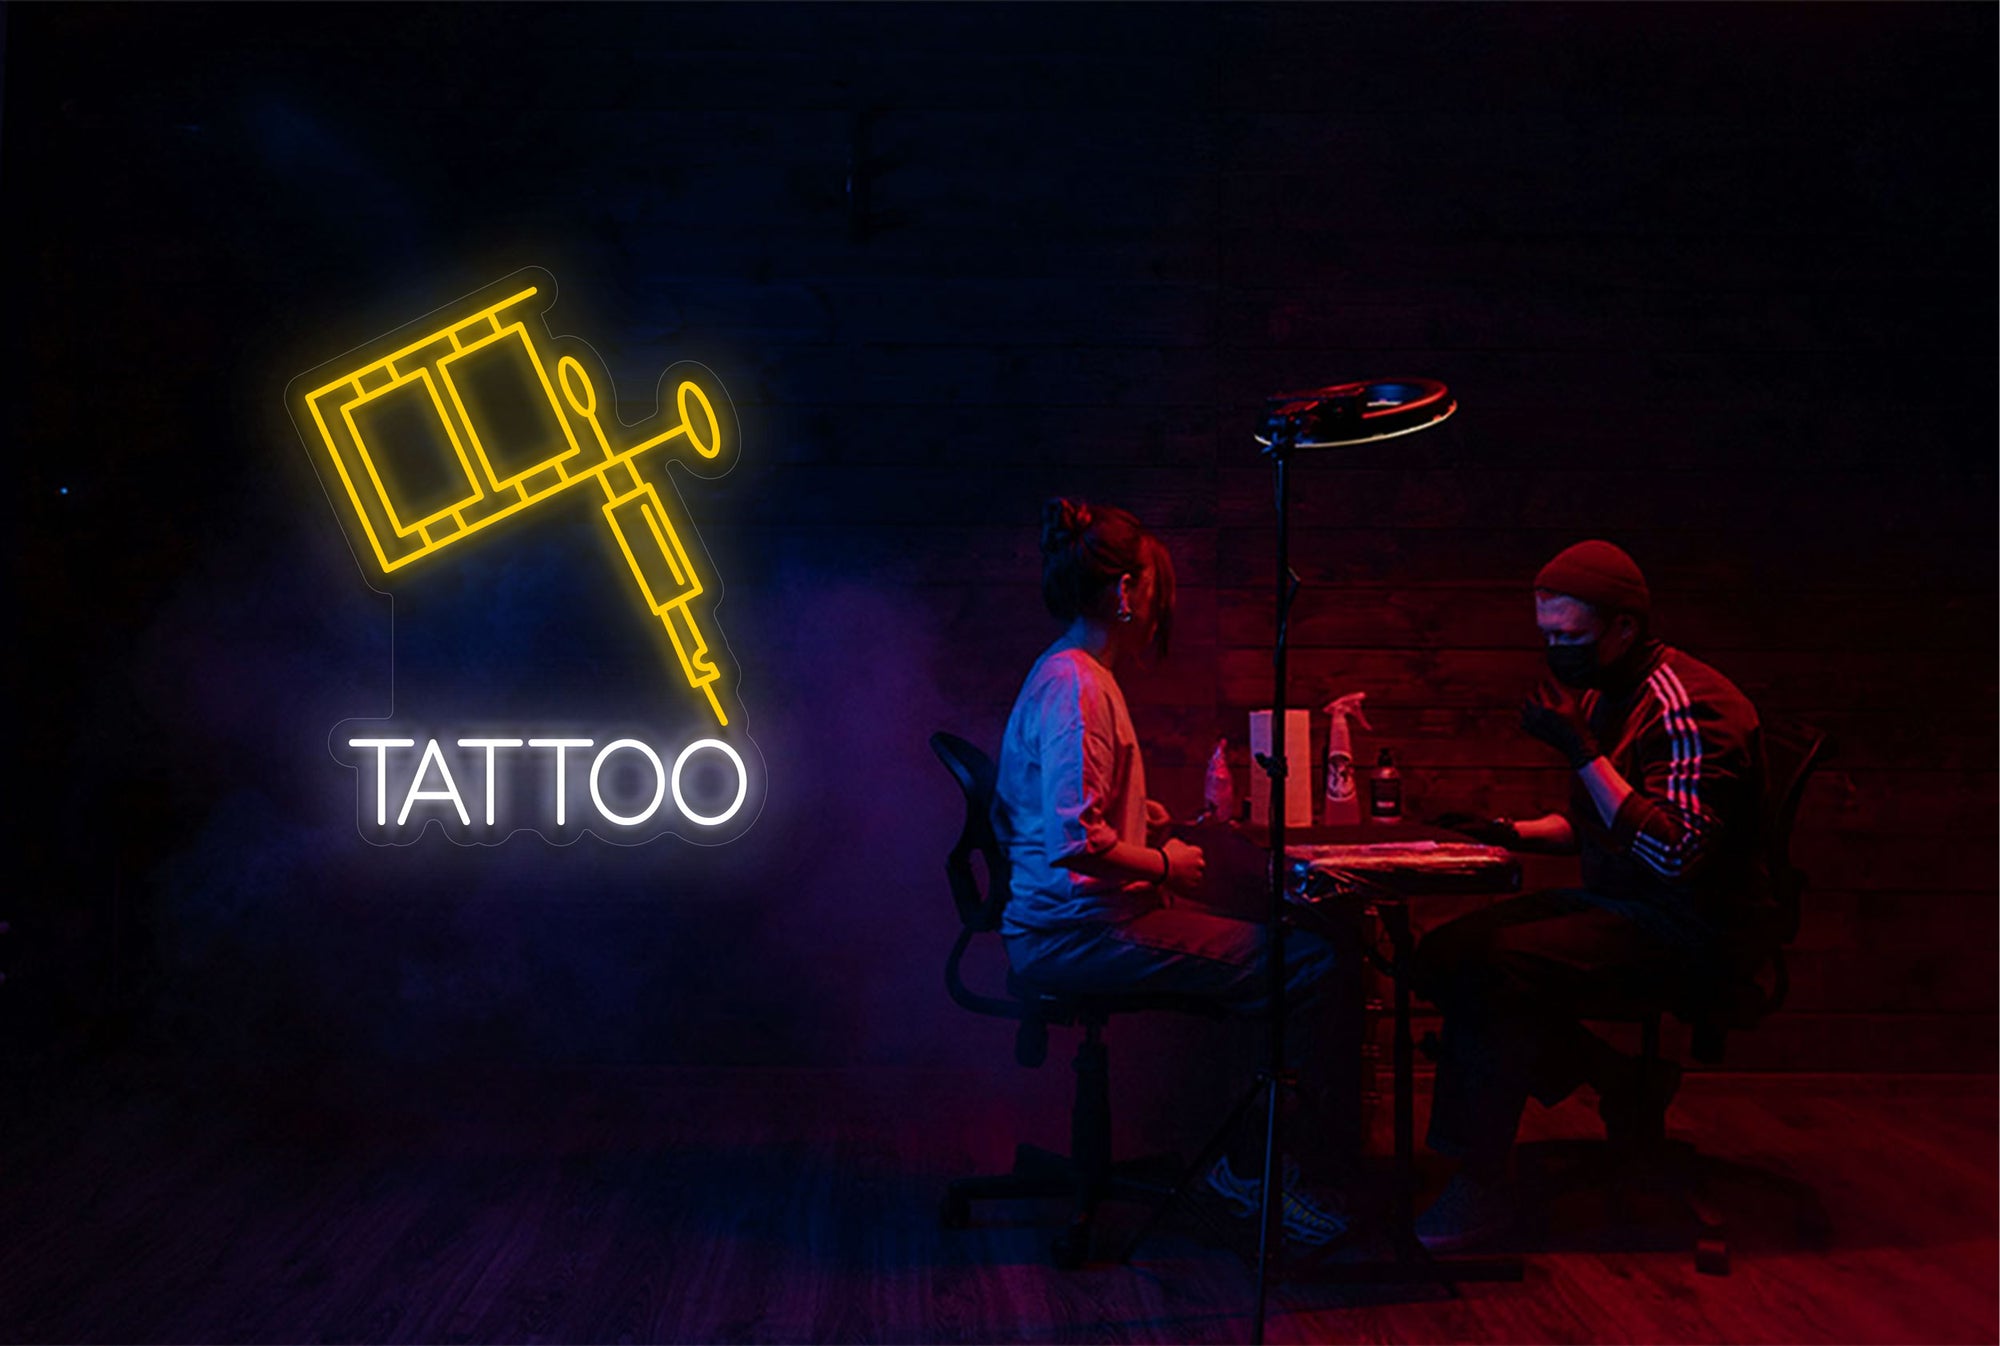 "Tattoo" with Tool LED Neon Sign